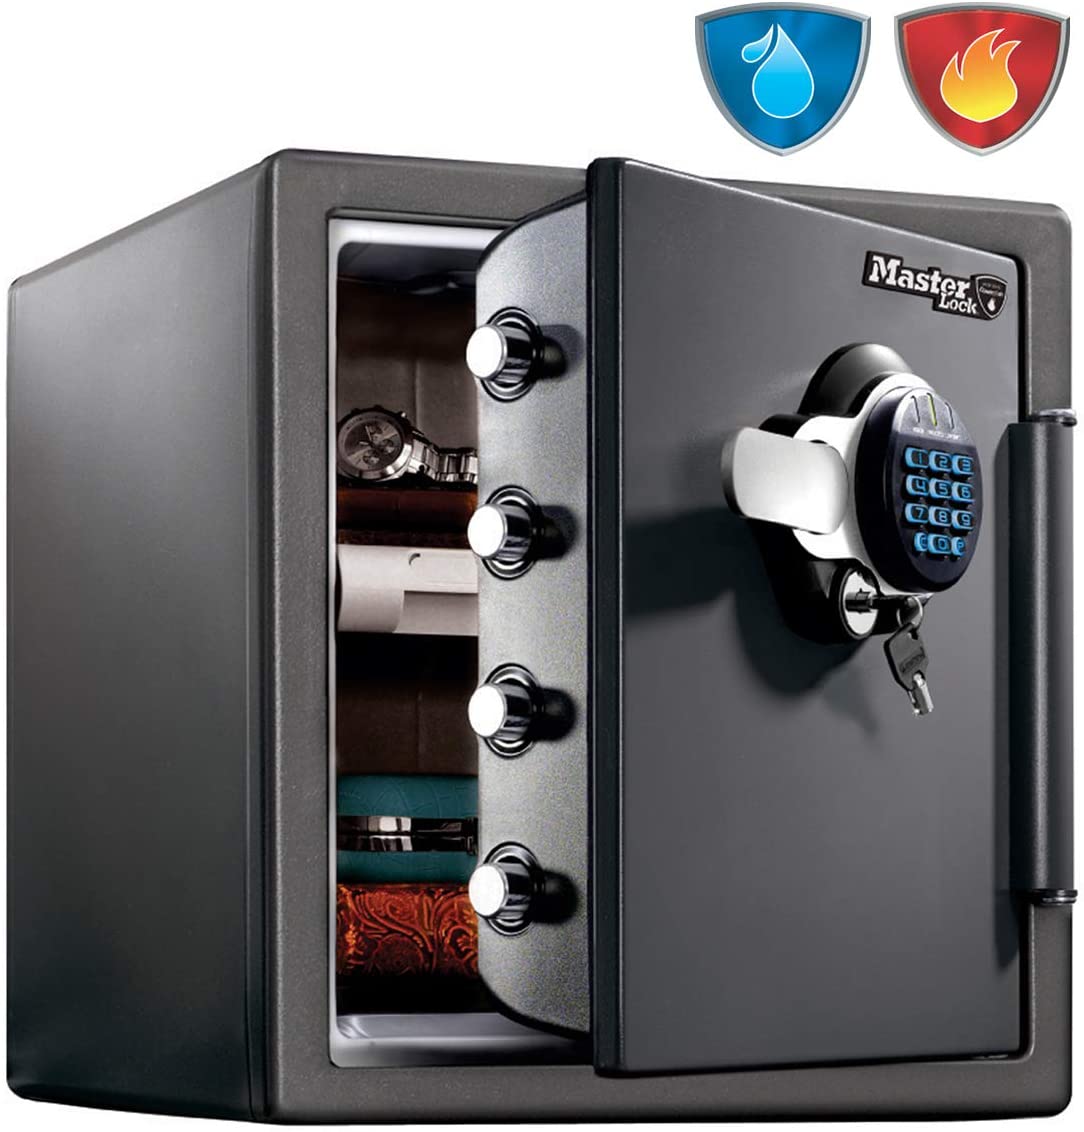 Master Lock Water and Fire proof safe LTW123GTC With Dual Locking.